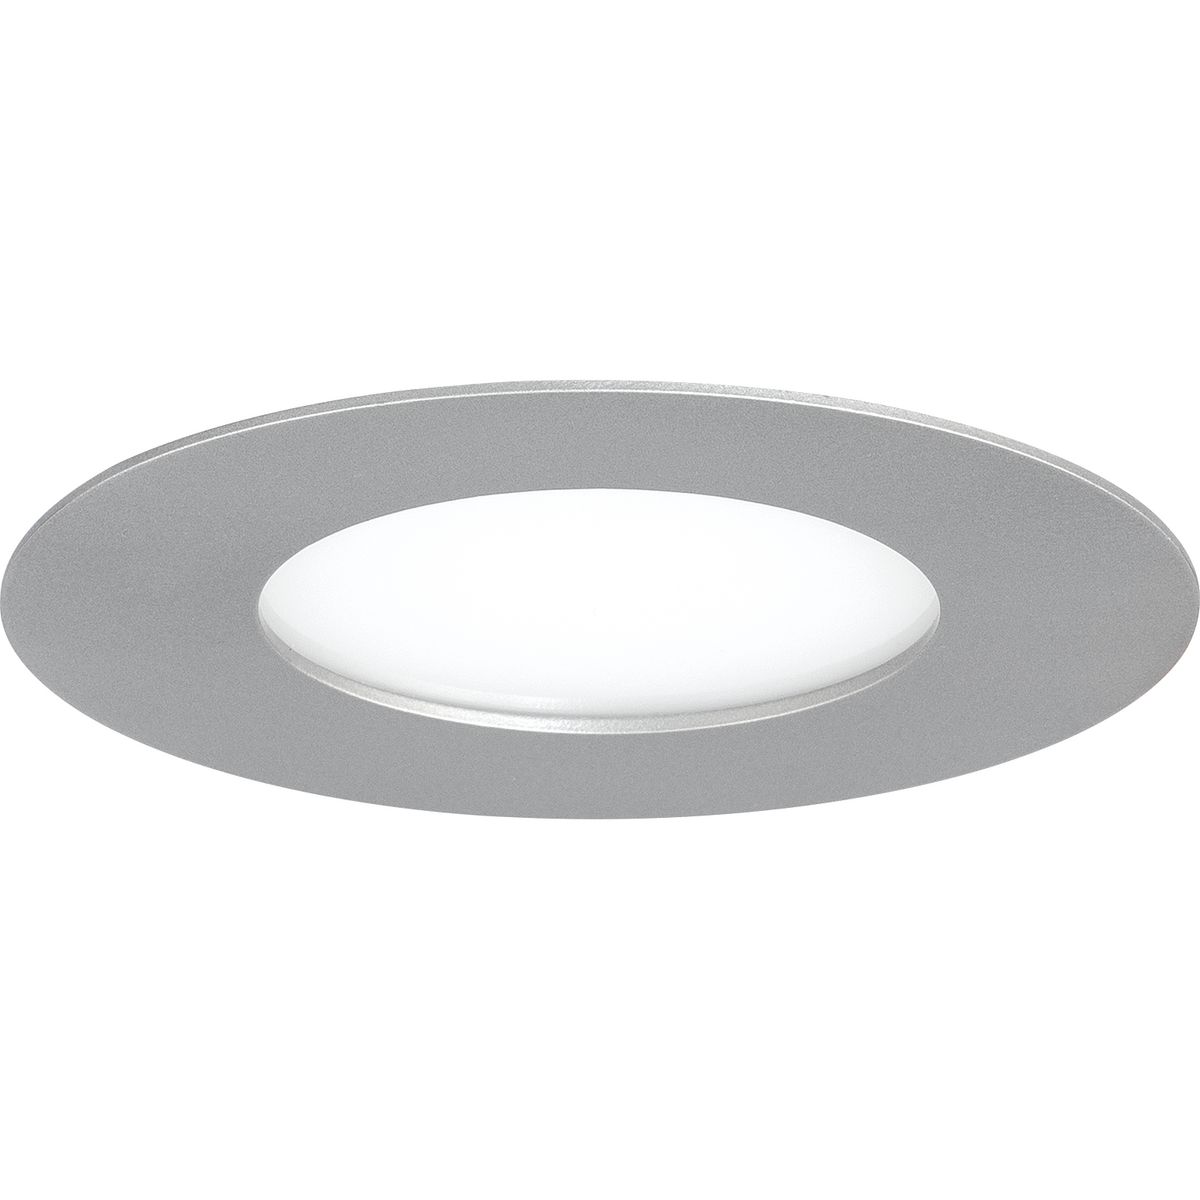 5 in Slim, low profile recessed downlight combines innovative technology, aesthetics, functionality and affordability. No housing or J-Box required for installation and wet location listed provides the ultimate flexibility. The low profile downlight is ideal for many residential, multi-family, commercial and hospitality applications. Featuring a detachable driver box, which can be mounted remotely for shallow ceiling installations. Energy efficient design provides up to a 75 percent energy savings and up to 54,000 hours of LED life. Flicker free dimming down to 10percent with many Forward Phase Triac and Electronic Low Voltage ELV dimmers. Brushed Nickel finish.